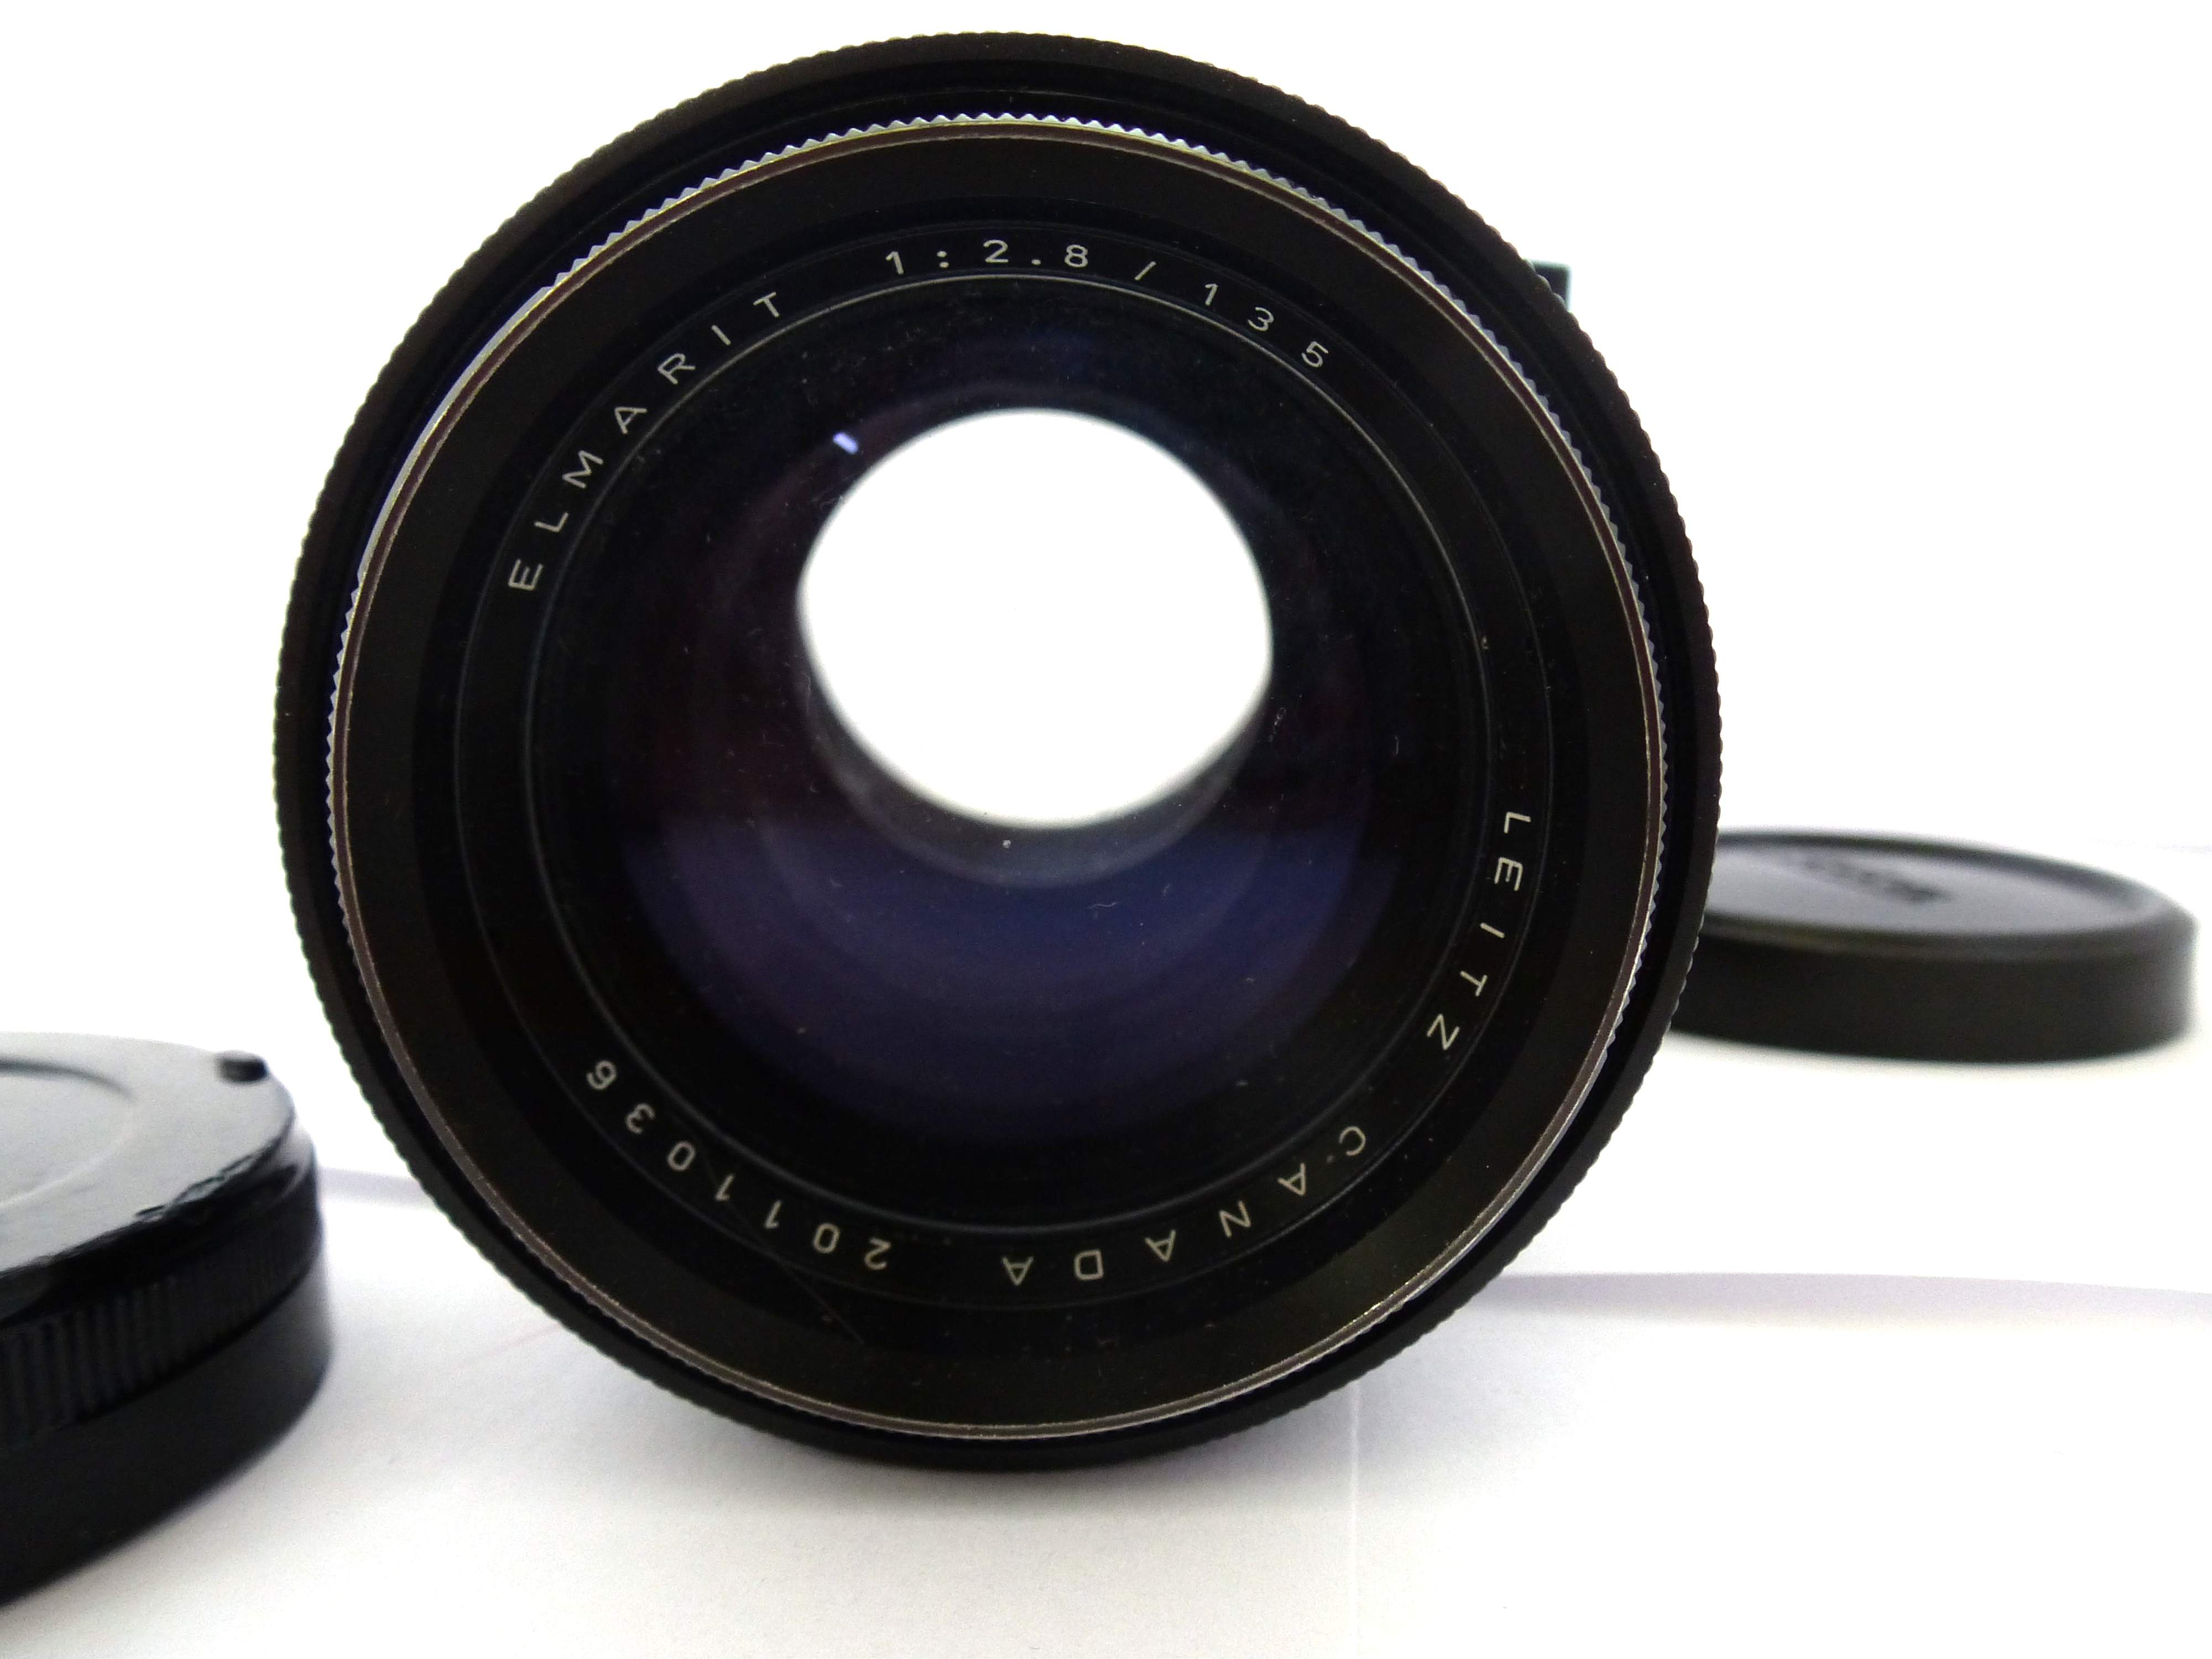 LEITZ CANADA ELMARIT 1:2.8/135 LENS - 2011036 WITH GOGGLES - Image 6 of 8